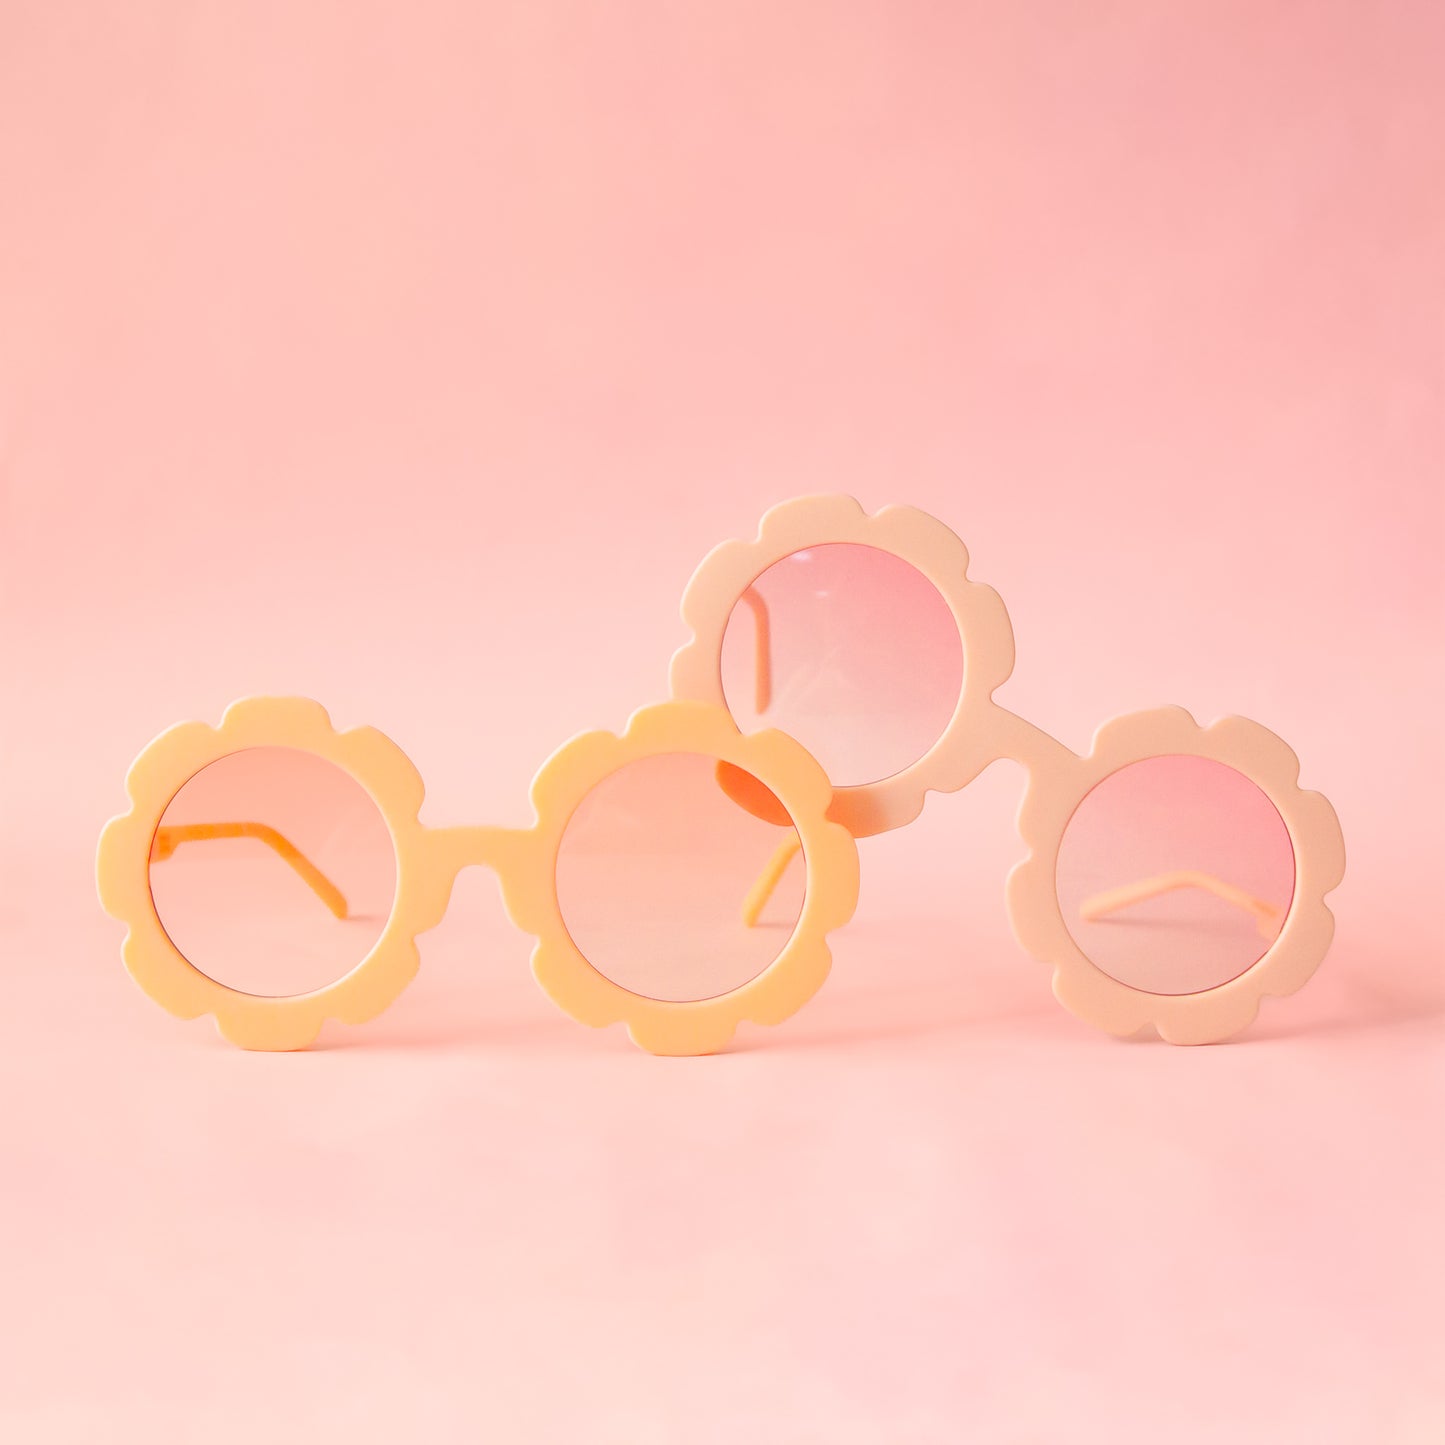 On a peachy background is a pair of flower shaped sunglasses with pink lenses and a apricot colored frame with the pink version of the flower sunglasses.